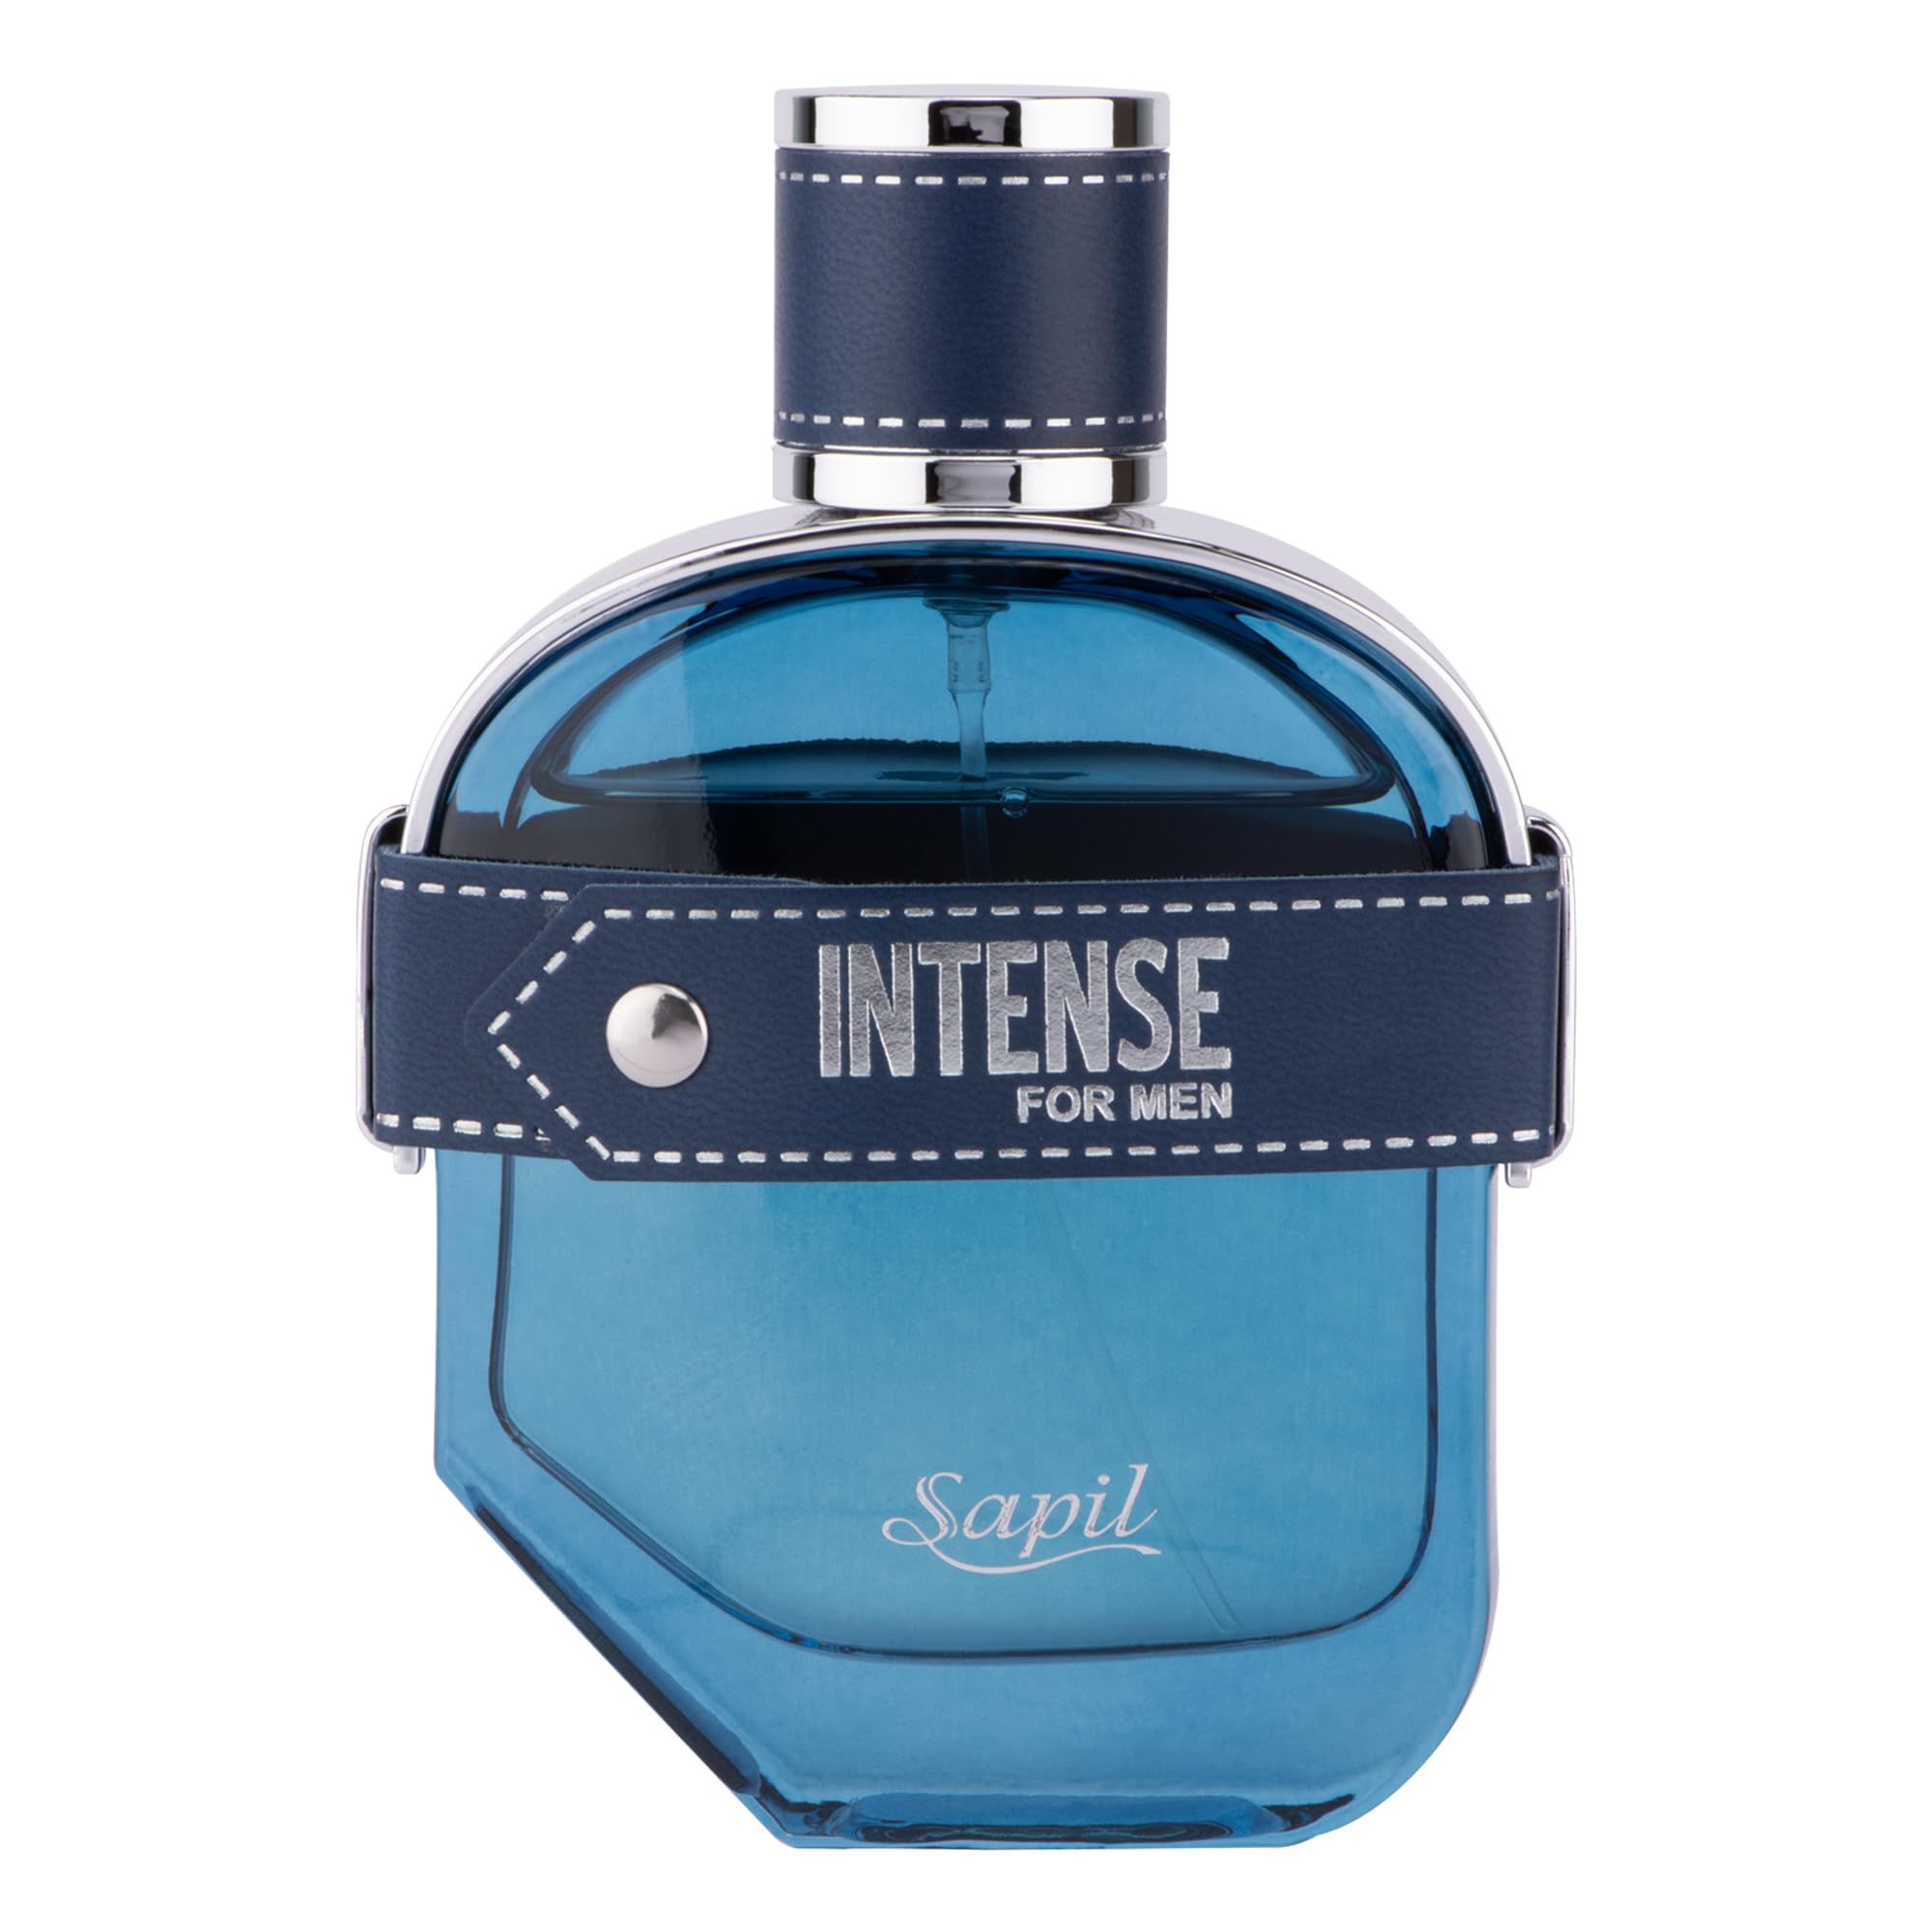 Sapil Intense EDP Parfum Eau De Spray Perfumes For Men| Mens Cologne Body Fragrance Perfume for Daily Use, Office and College- 3.4 Ounce/100ml (1166)